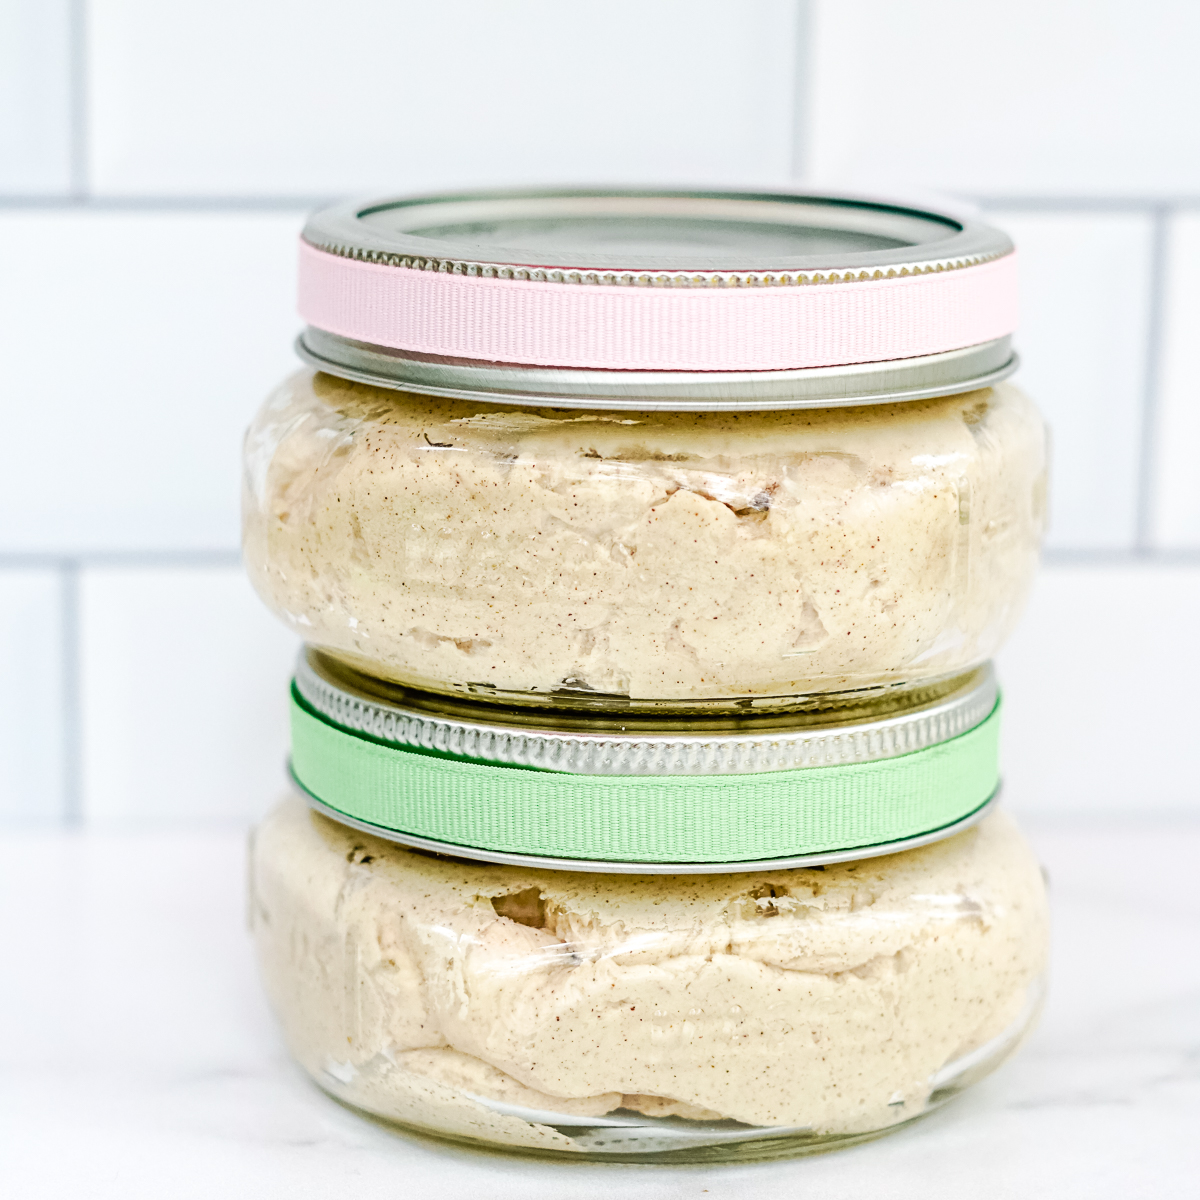 Whipped cinnamon honey butter in glass mason jars with mint green and pale pink ribbons tied around the top.